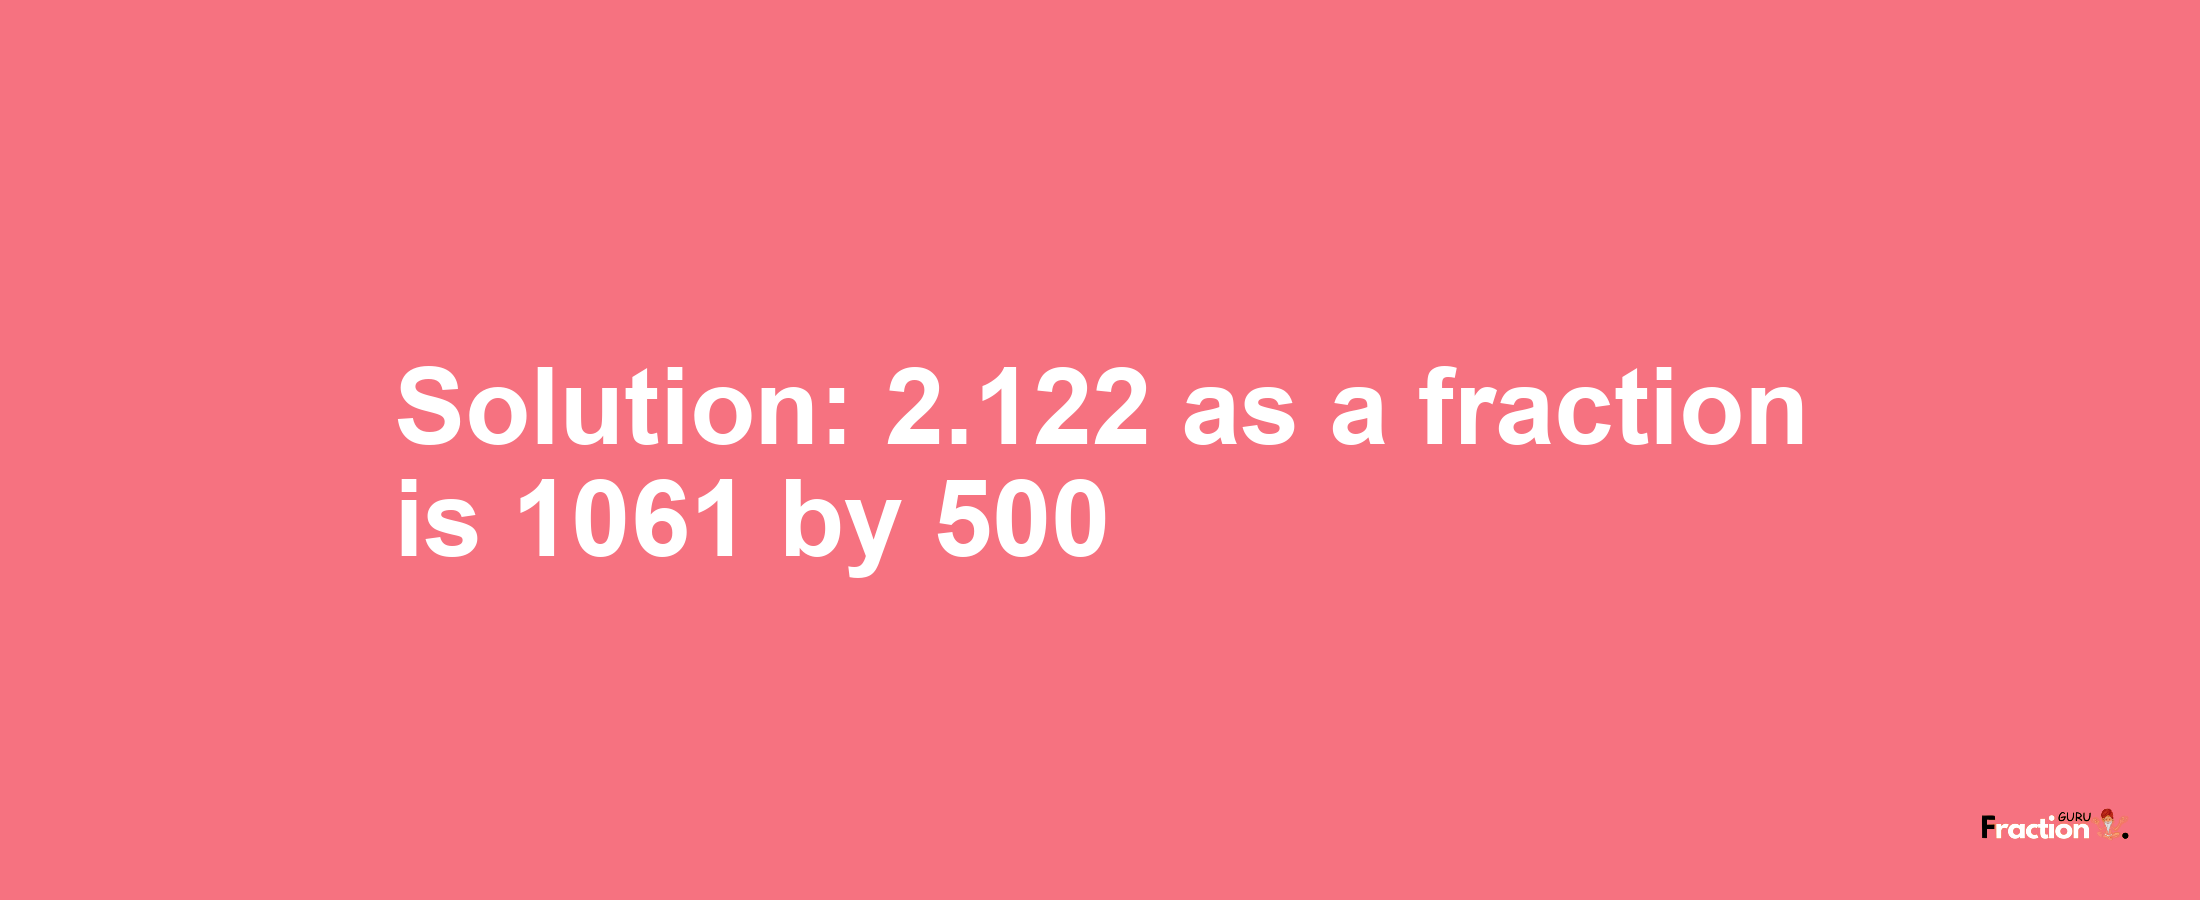 Solution:2.122 as a fraction is 1061/500